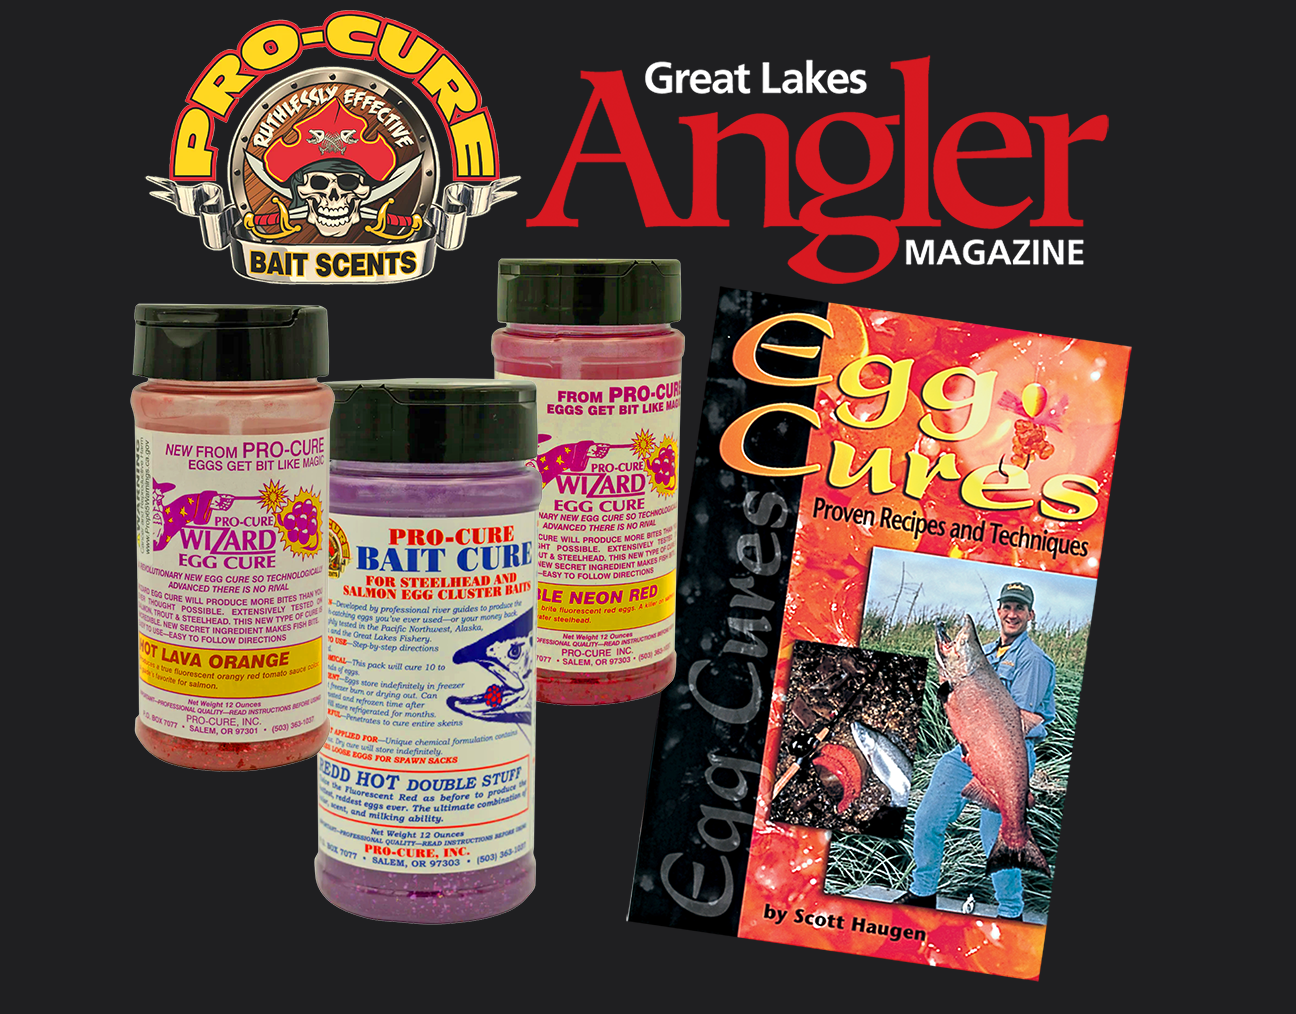 Pro-Cure Egg Cure + Egg Cures + Great Lakes Angler magazine 1 year dig